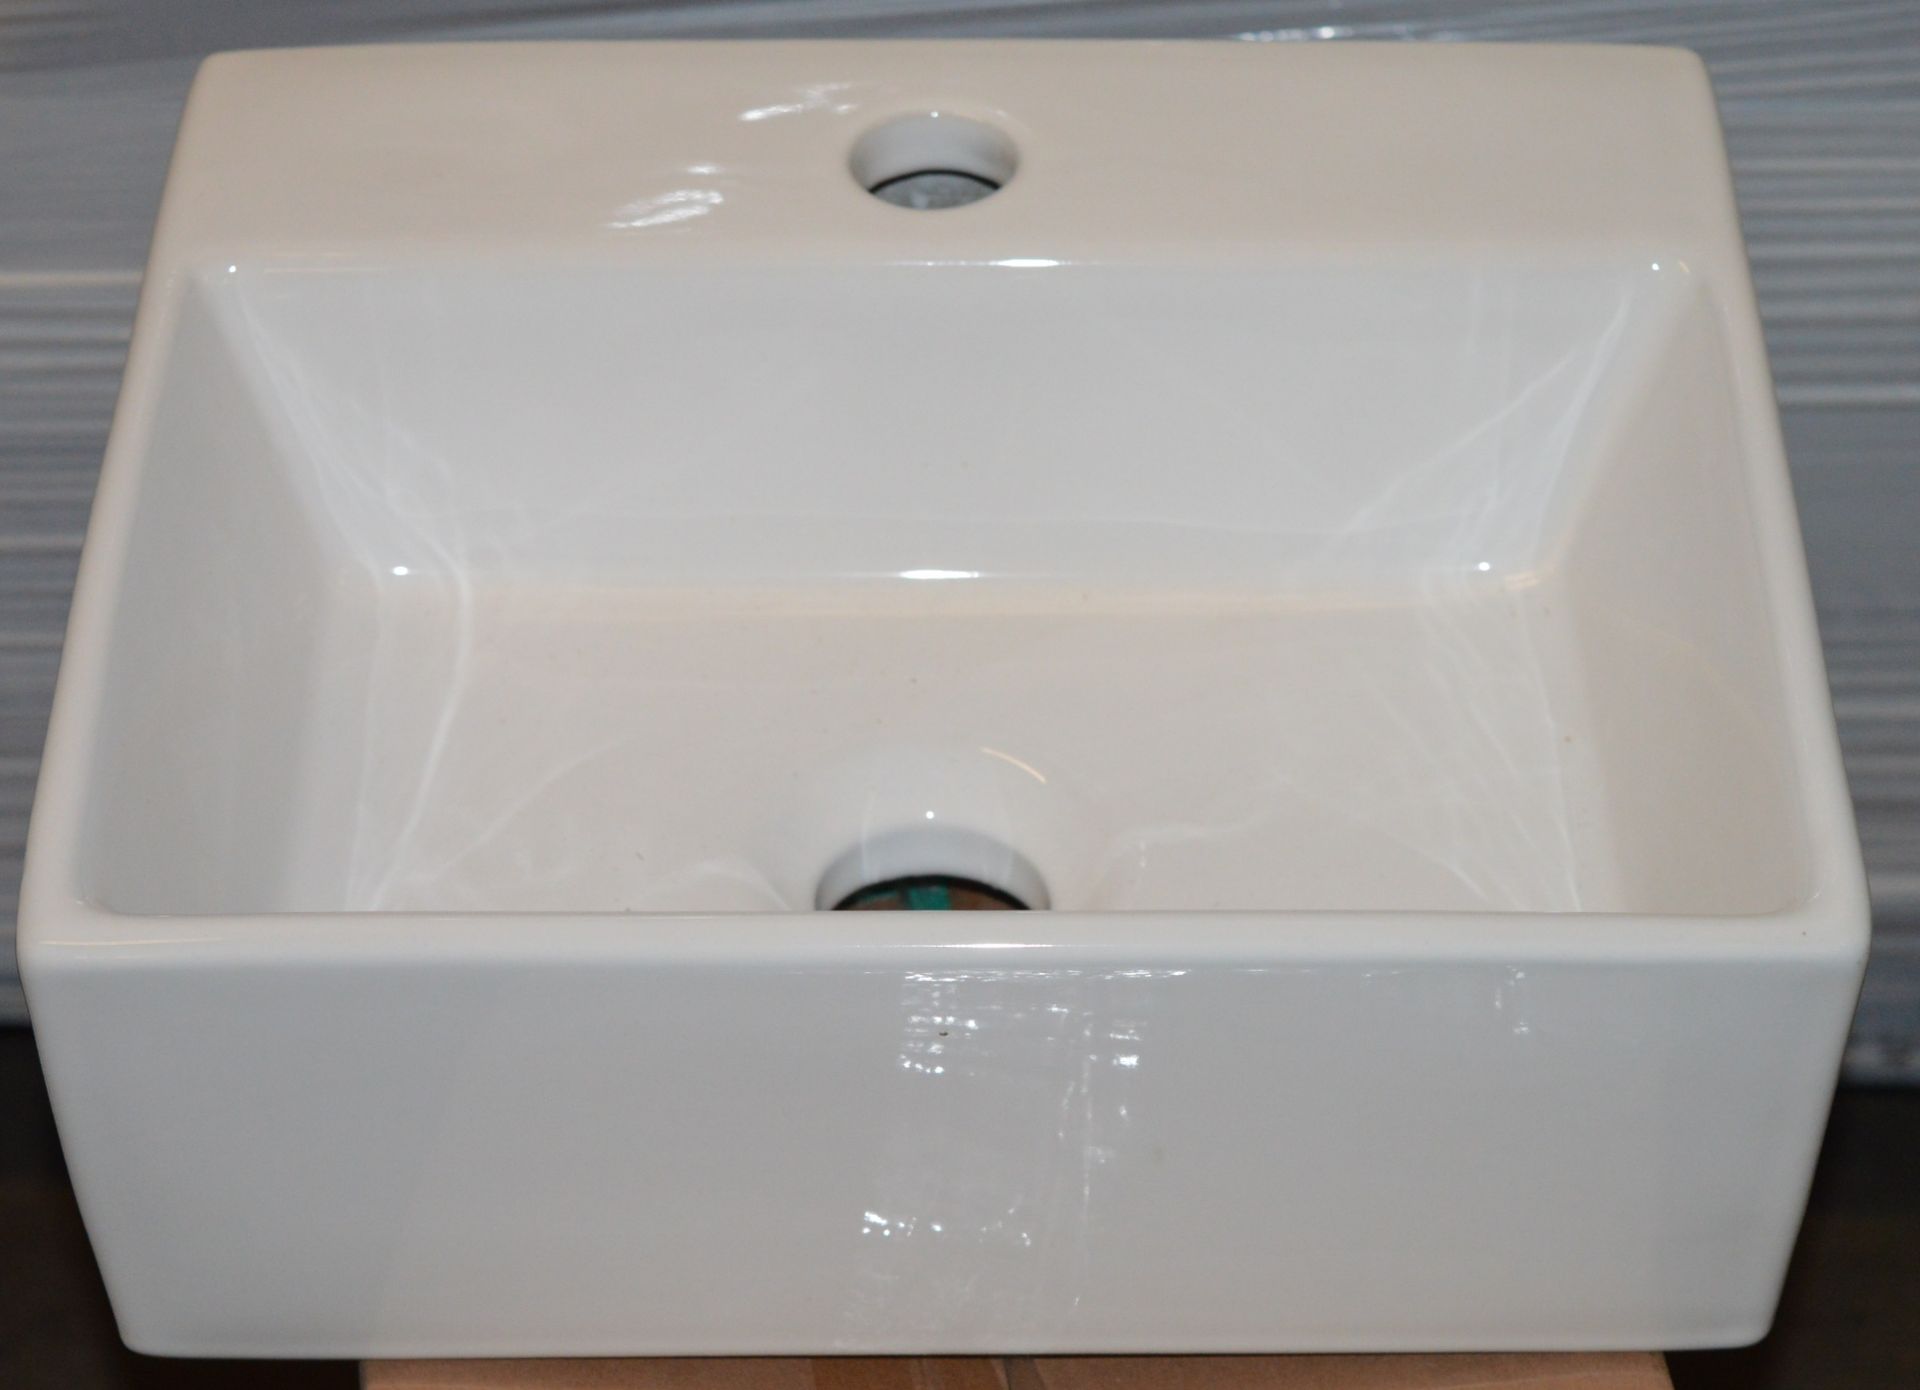 1 x Bologna Wall Mounted Sink Basin - 34x30cms - Unused Stock - CL190 - Ref BR113 - Location: Bolton